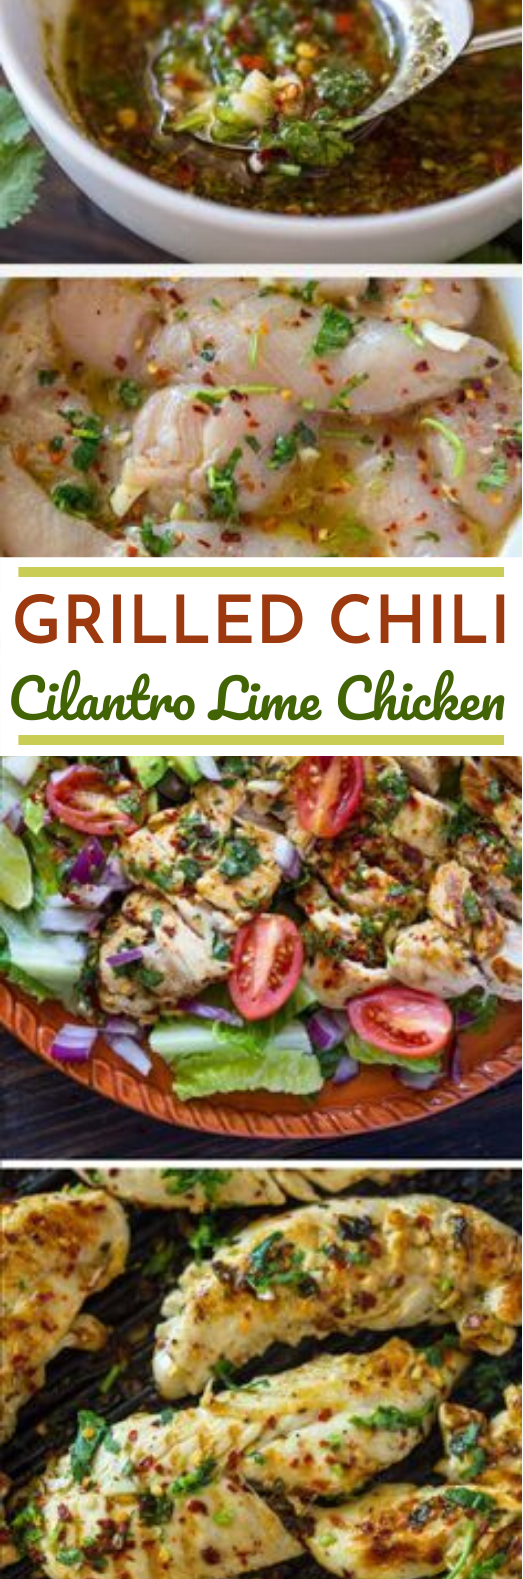 Grilled Chili Cilantro Lime Chicken #dinner #chicken #grilling #recipes #lunch